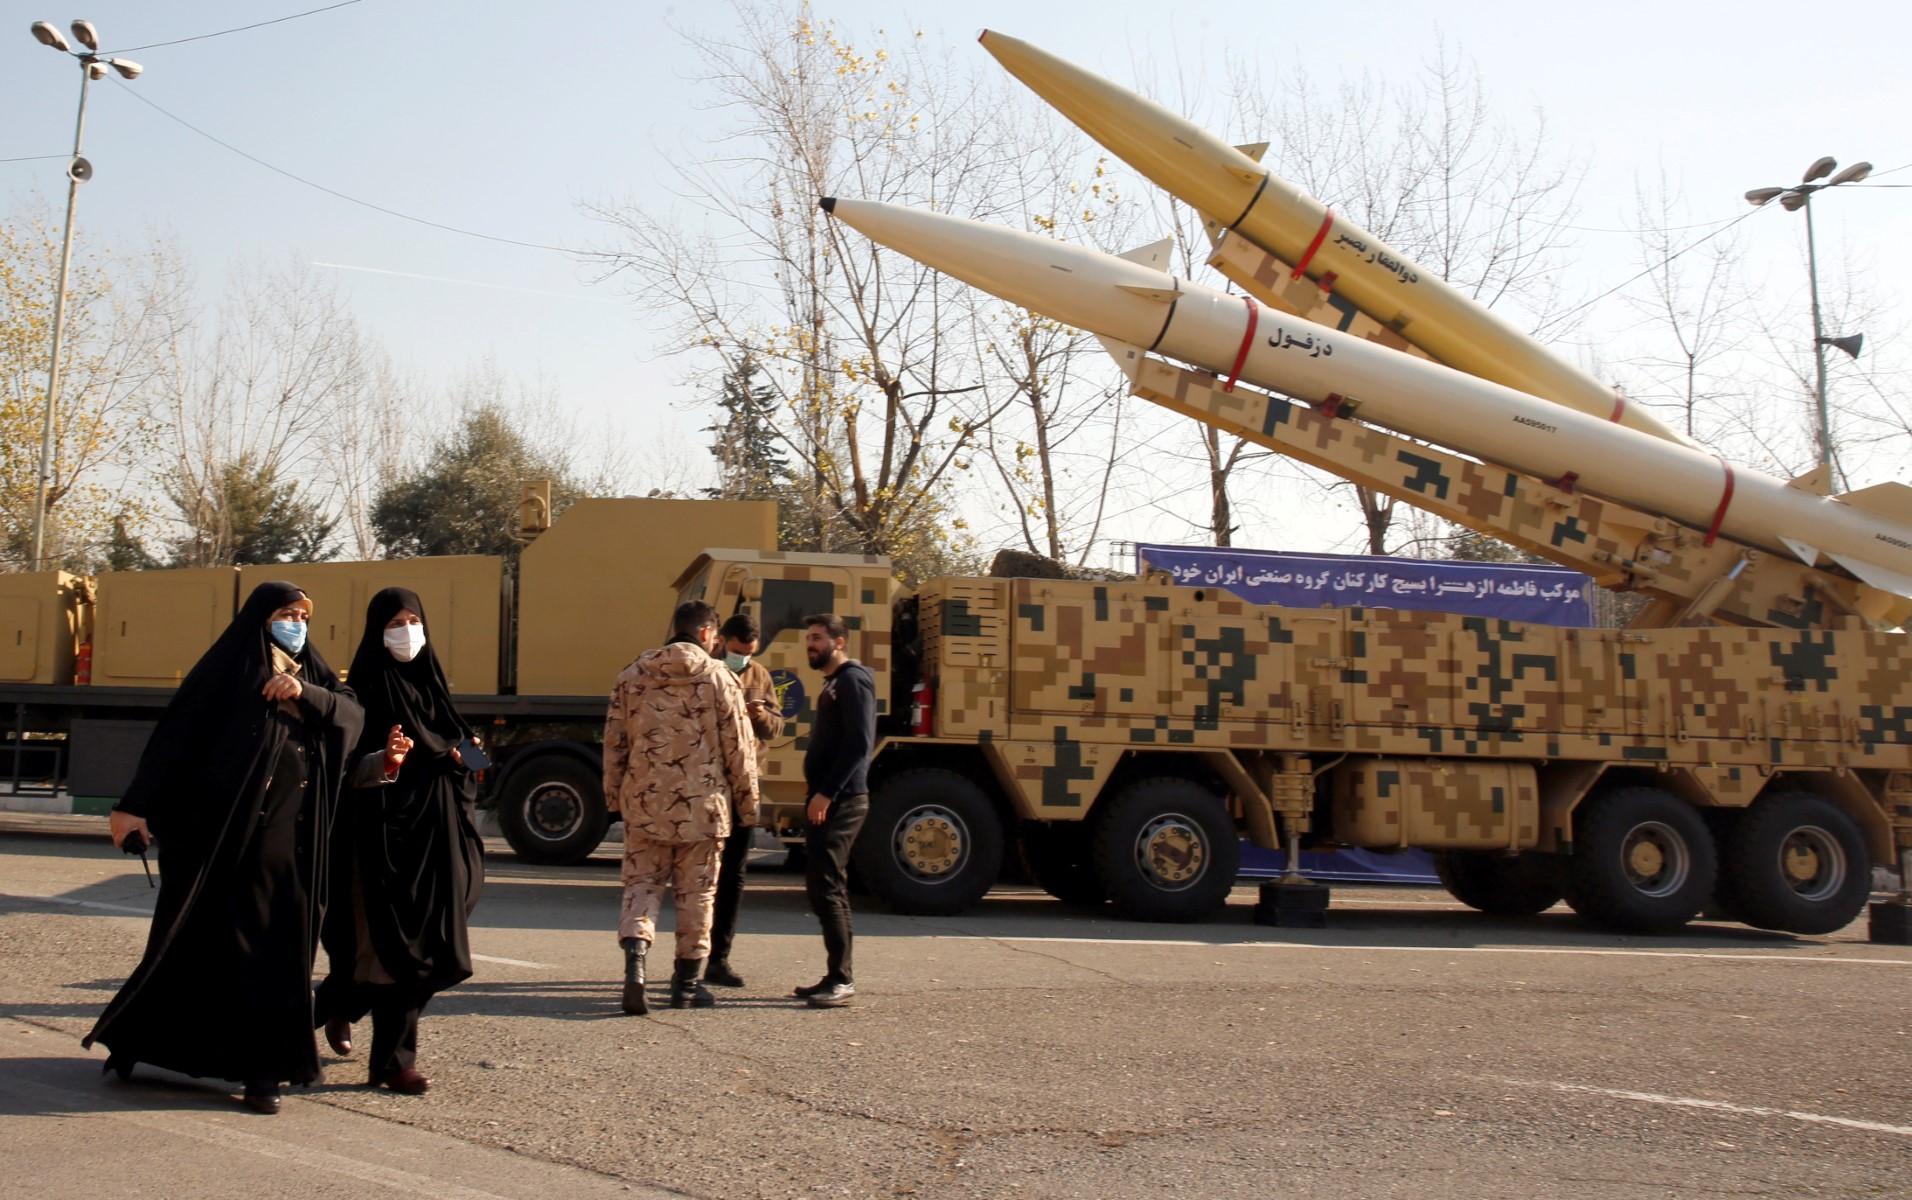 Iranian women walk next to Zolfaghar-Basir and Dezful missiles displayed at Mosallah mosque on the occasion of second anniversary of an Iran missile attack at a US military base in Iraq following the assassination of a former top Iranian commander, in Tehran, on Jan 7. Photo: AFP